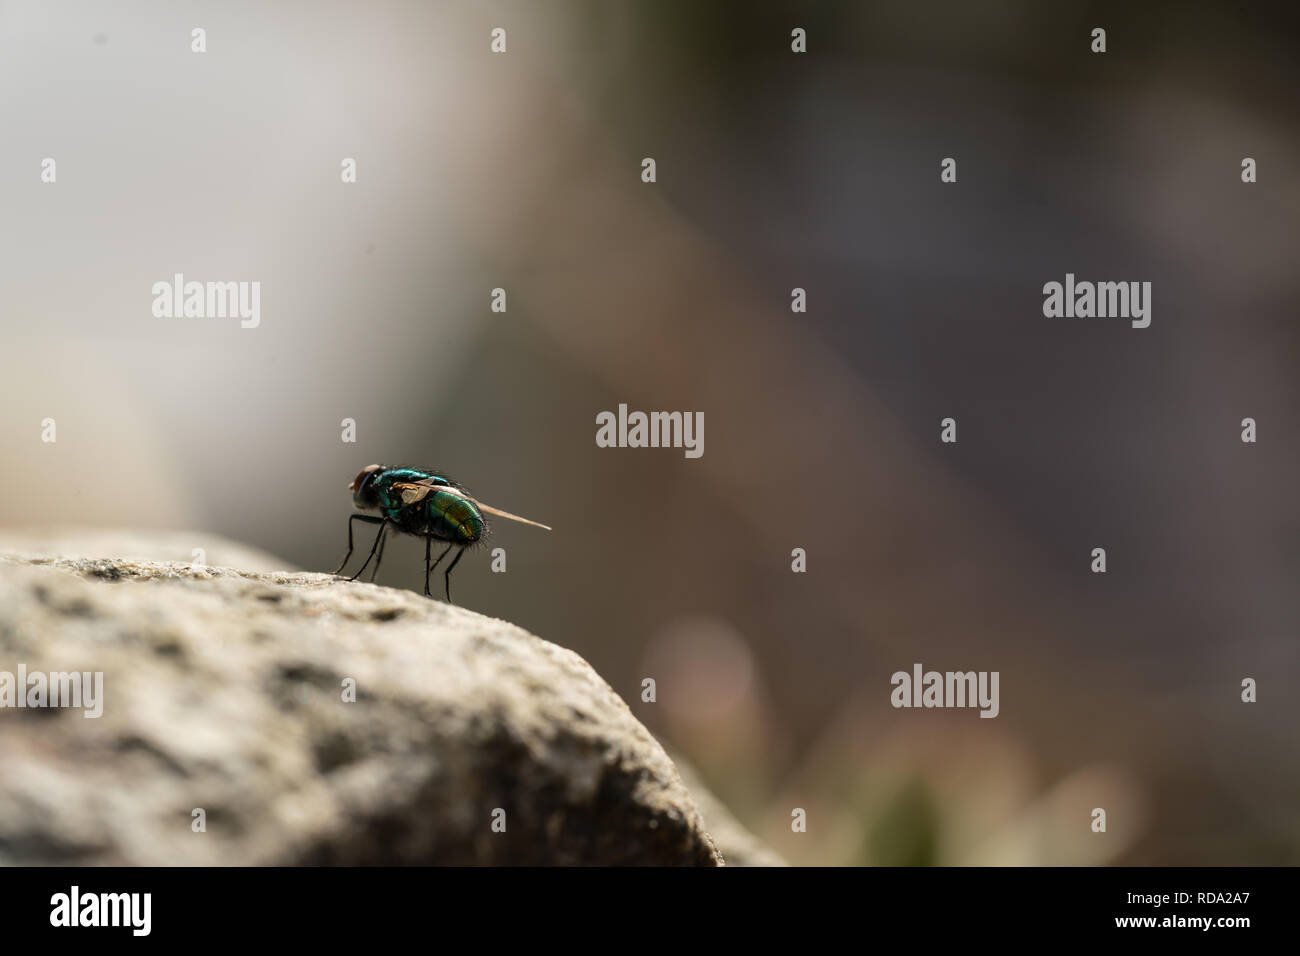 Common green bottle fly close up, macro Lucilia sericata fly, sitting on a stone Stock Photo